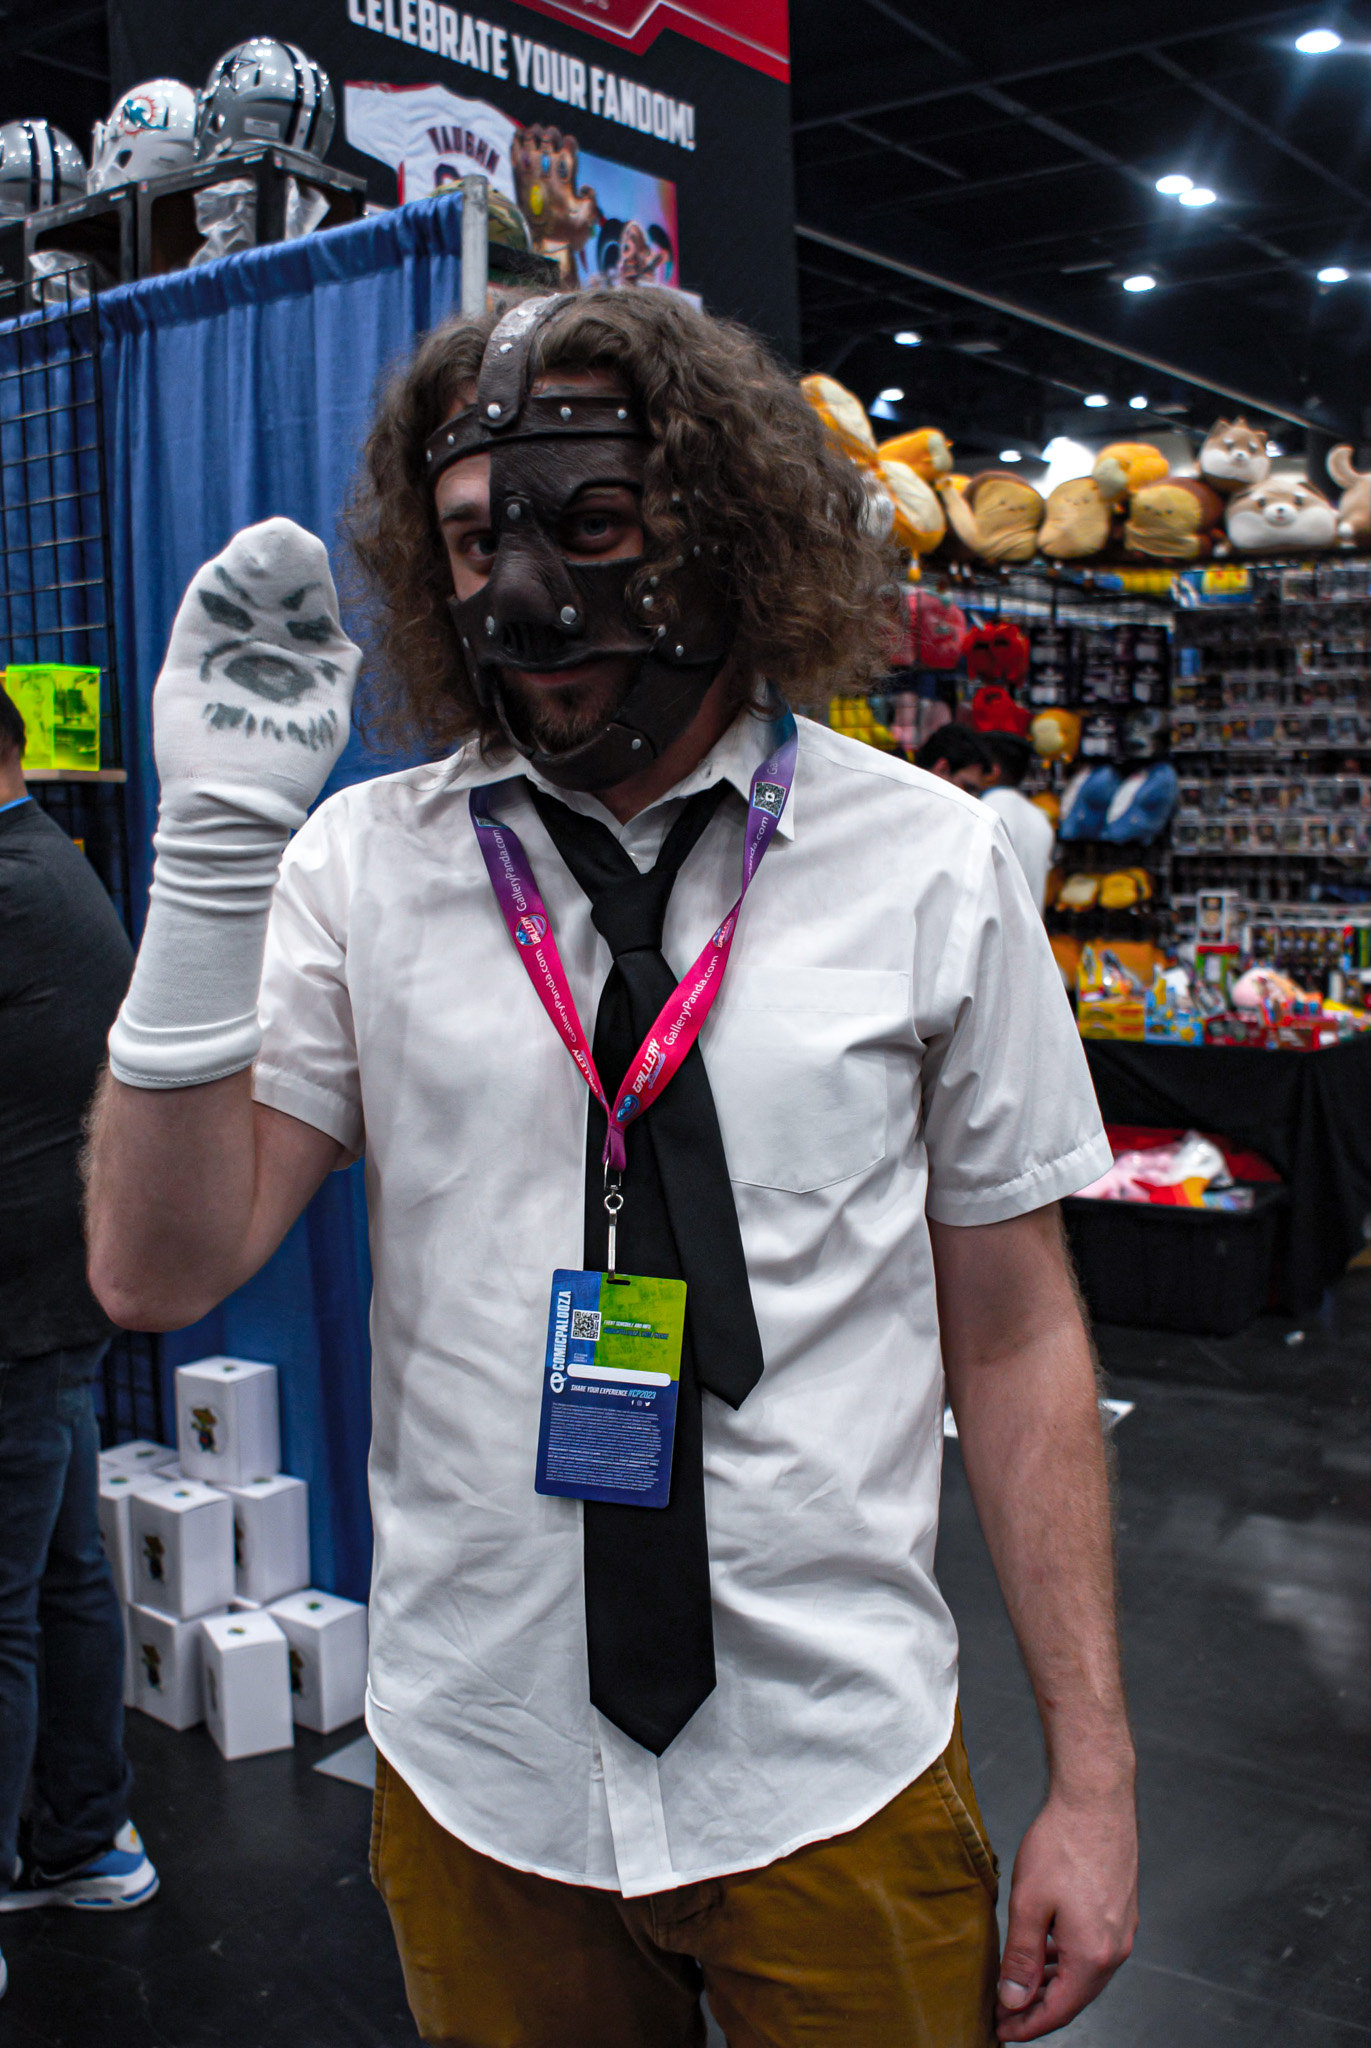 Lucas, a first-time attendee of Comicpalooza, is cosplaying as WWE superstar Mankind and alter ego of Mick Foley. Lucas told me that he got the chance to see Mick Foley as he was one of the celebrity guests at the convention. This cosplay took Lucas exactly one day to make. Photo by reporter Adan Martinez.